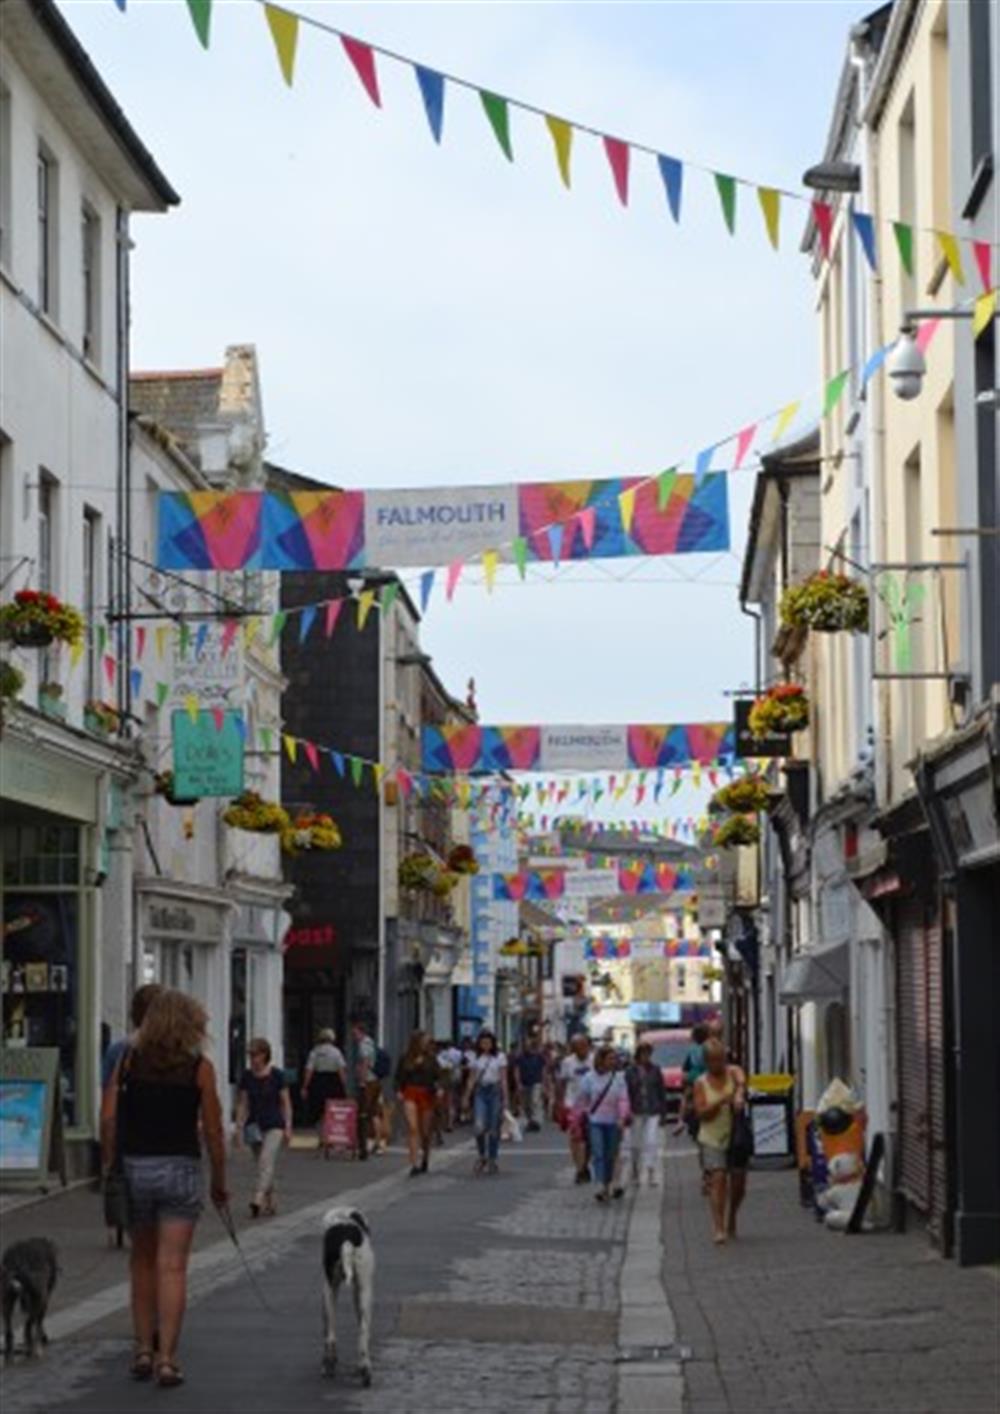 Falmouth town, with its range of shops. at Anchors Aweigh in Helford Passage